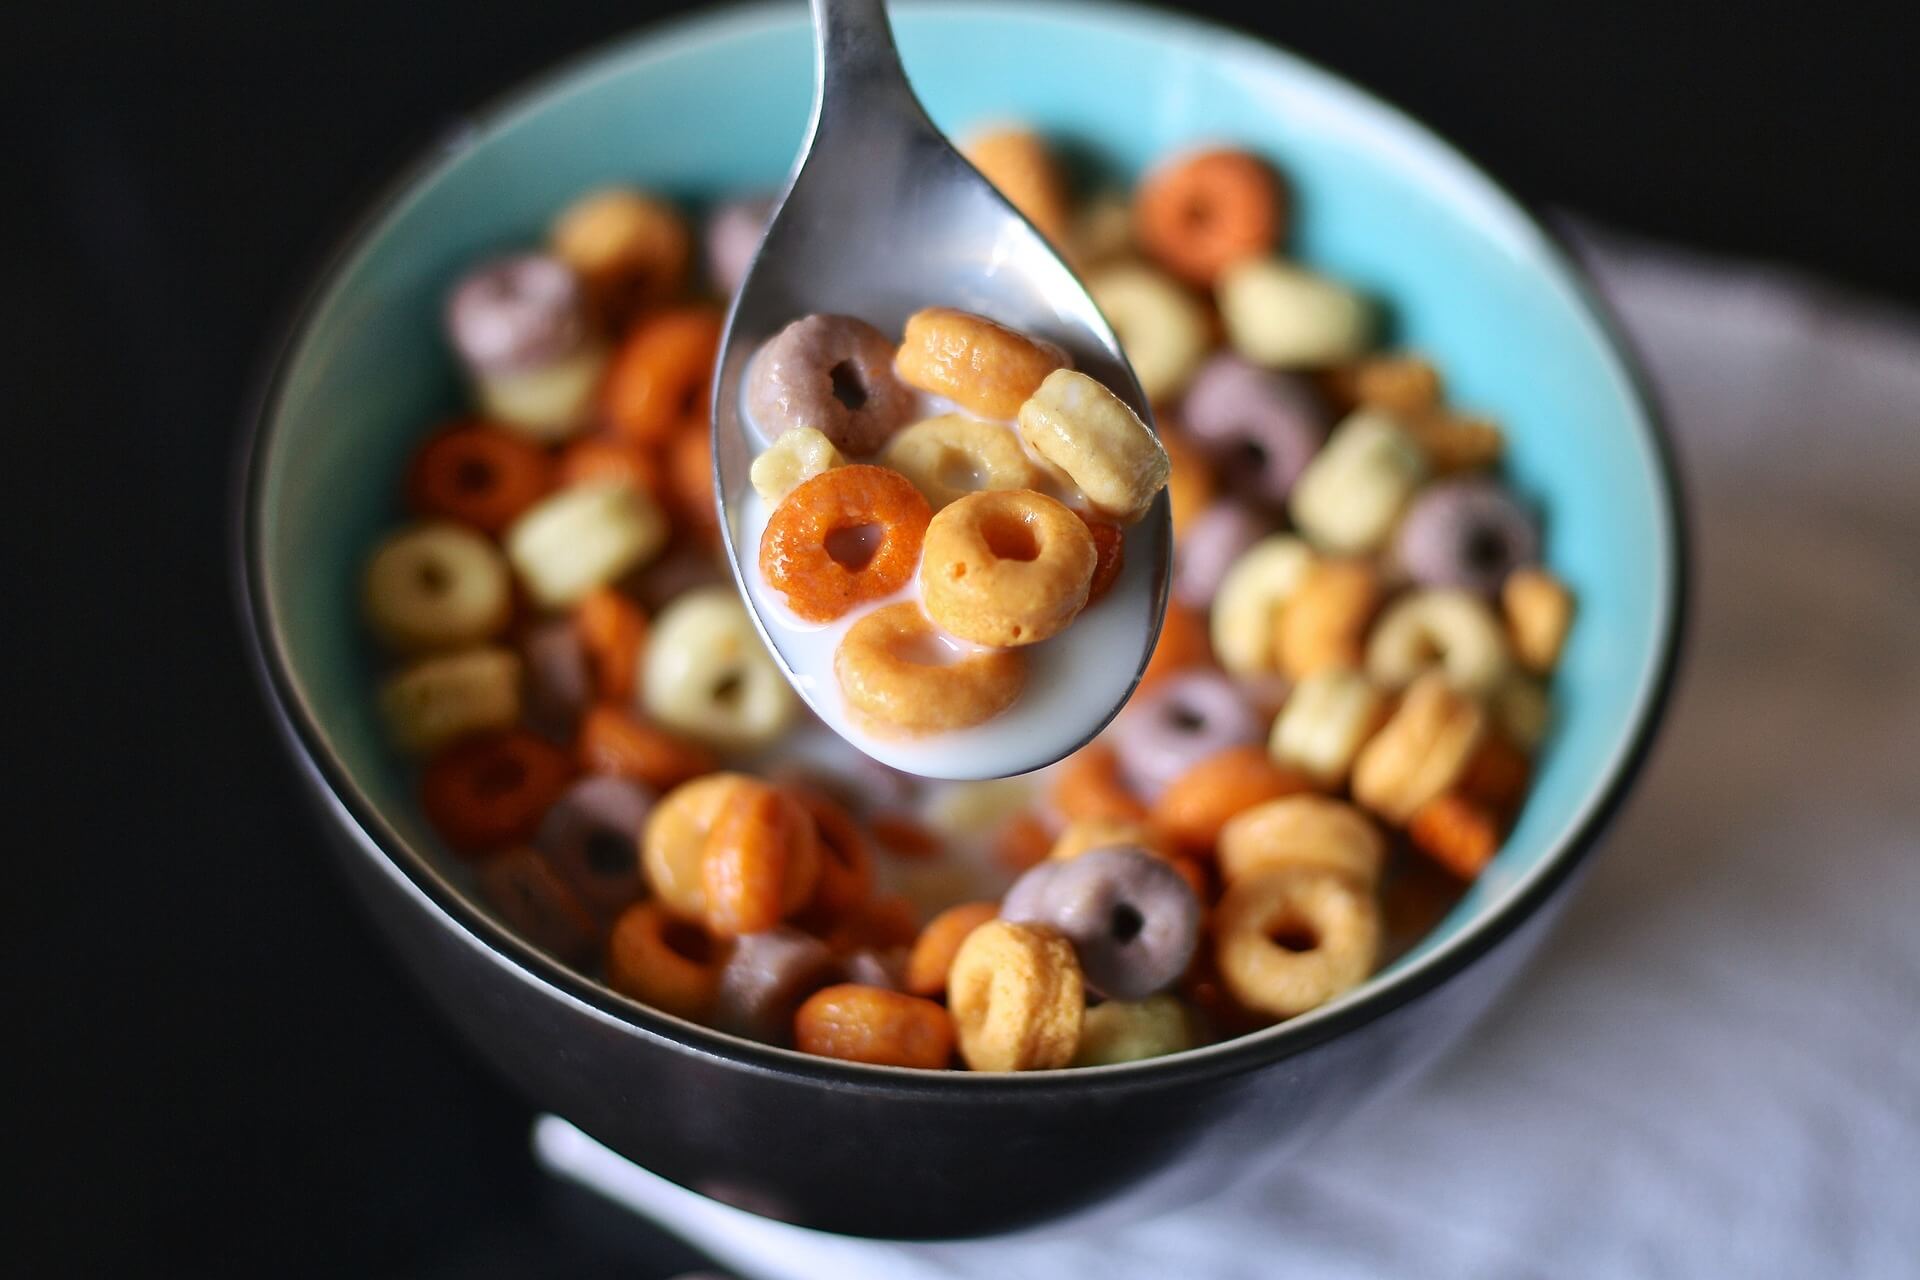 Colorful cereal in a bowl